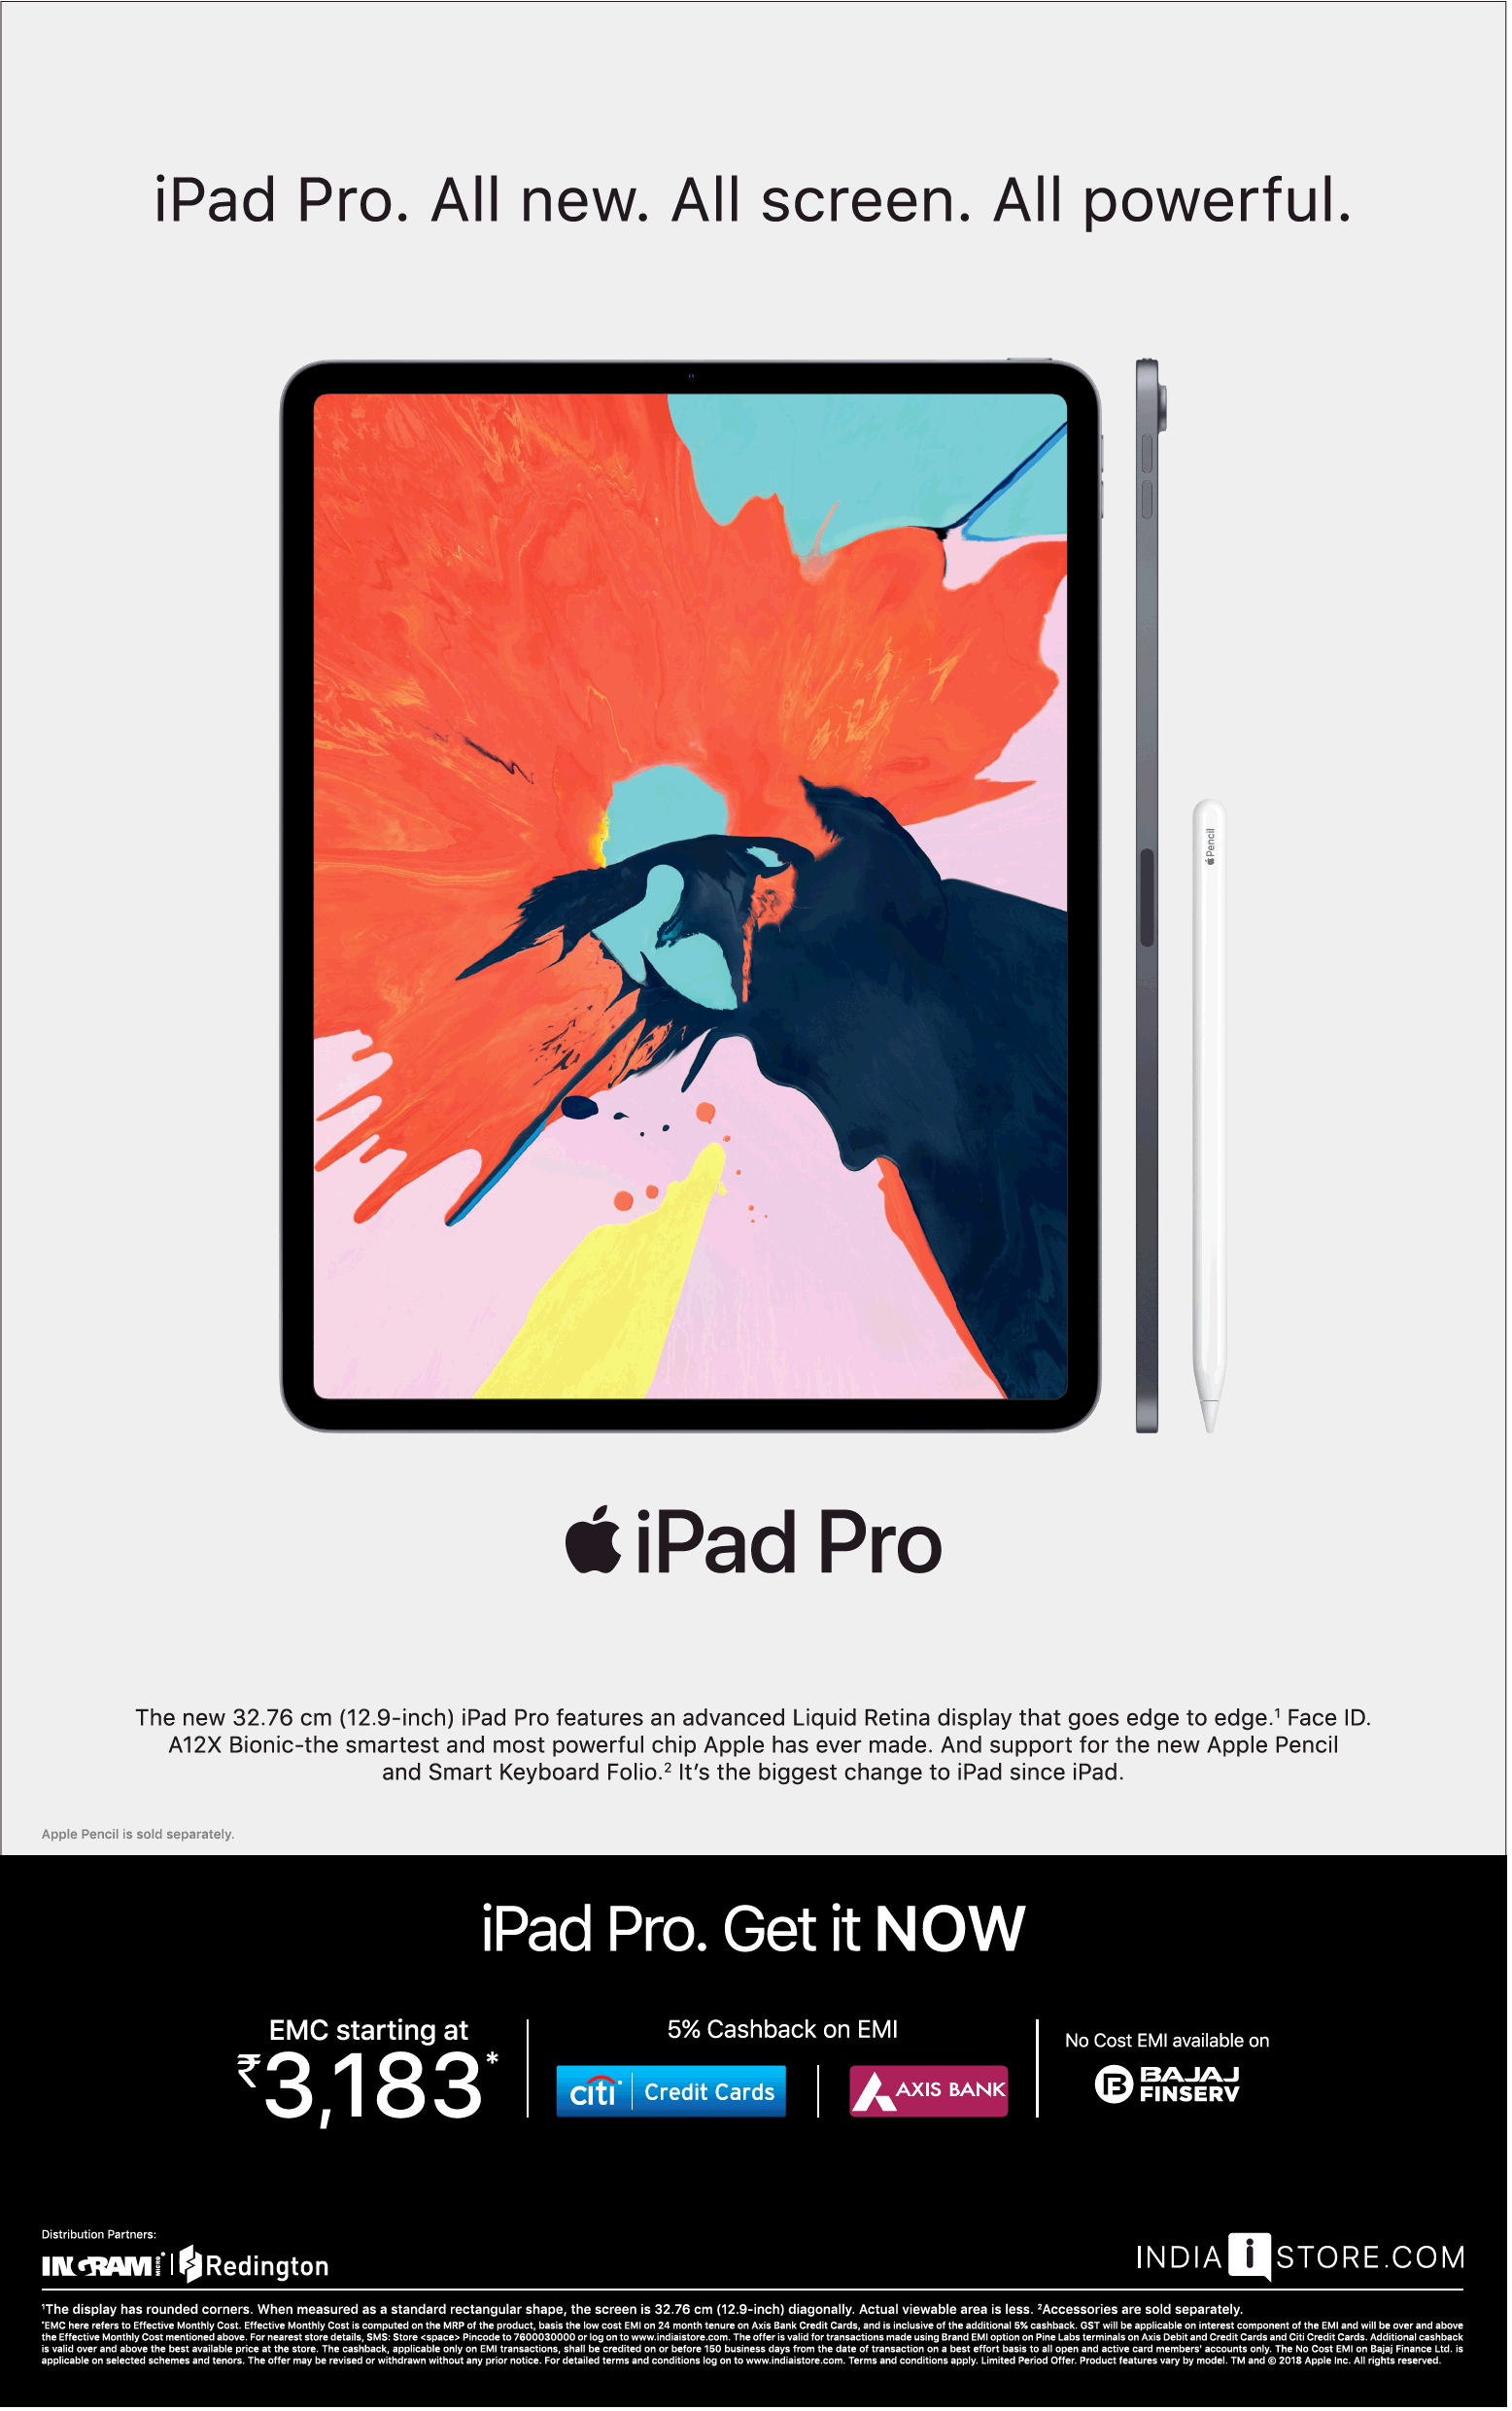 ipad-pro-all-new-all-screen-all-powerful-ad-times-of-india-mumbai-14-12-2018.png